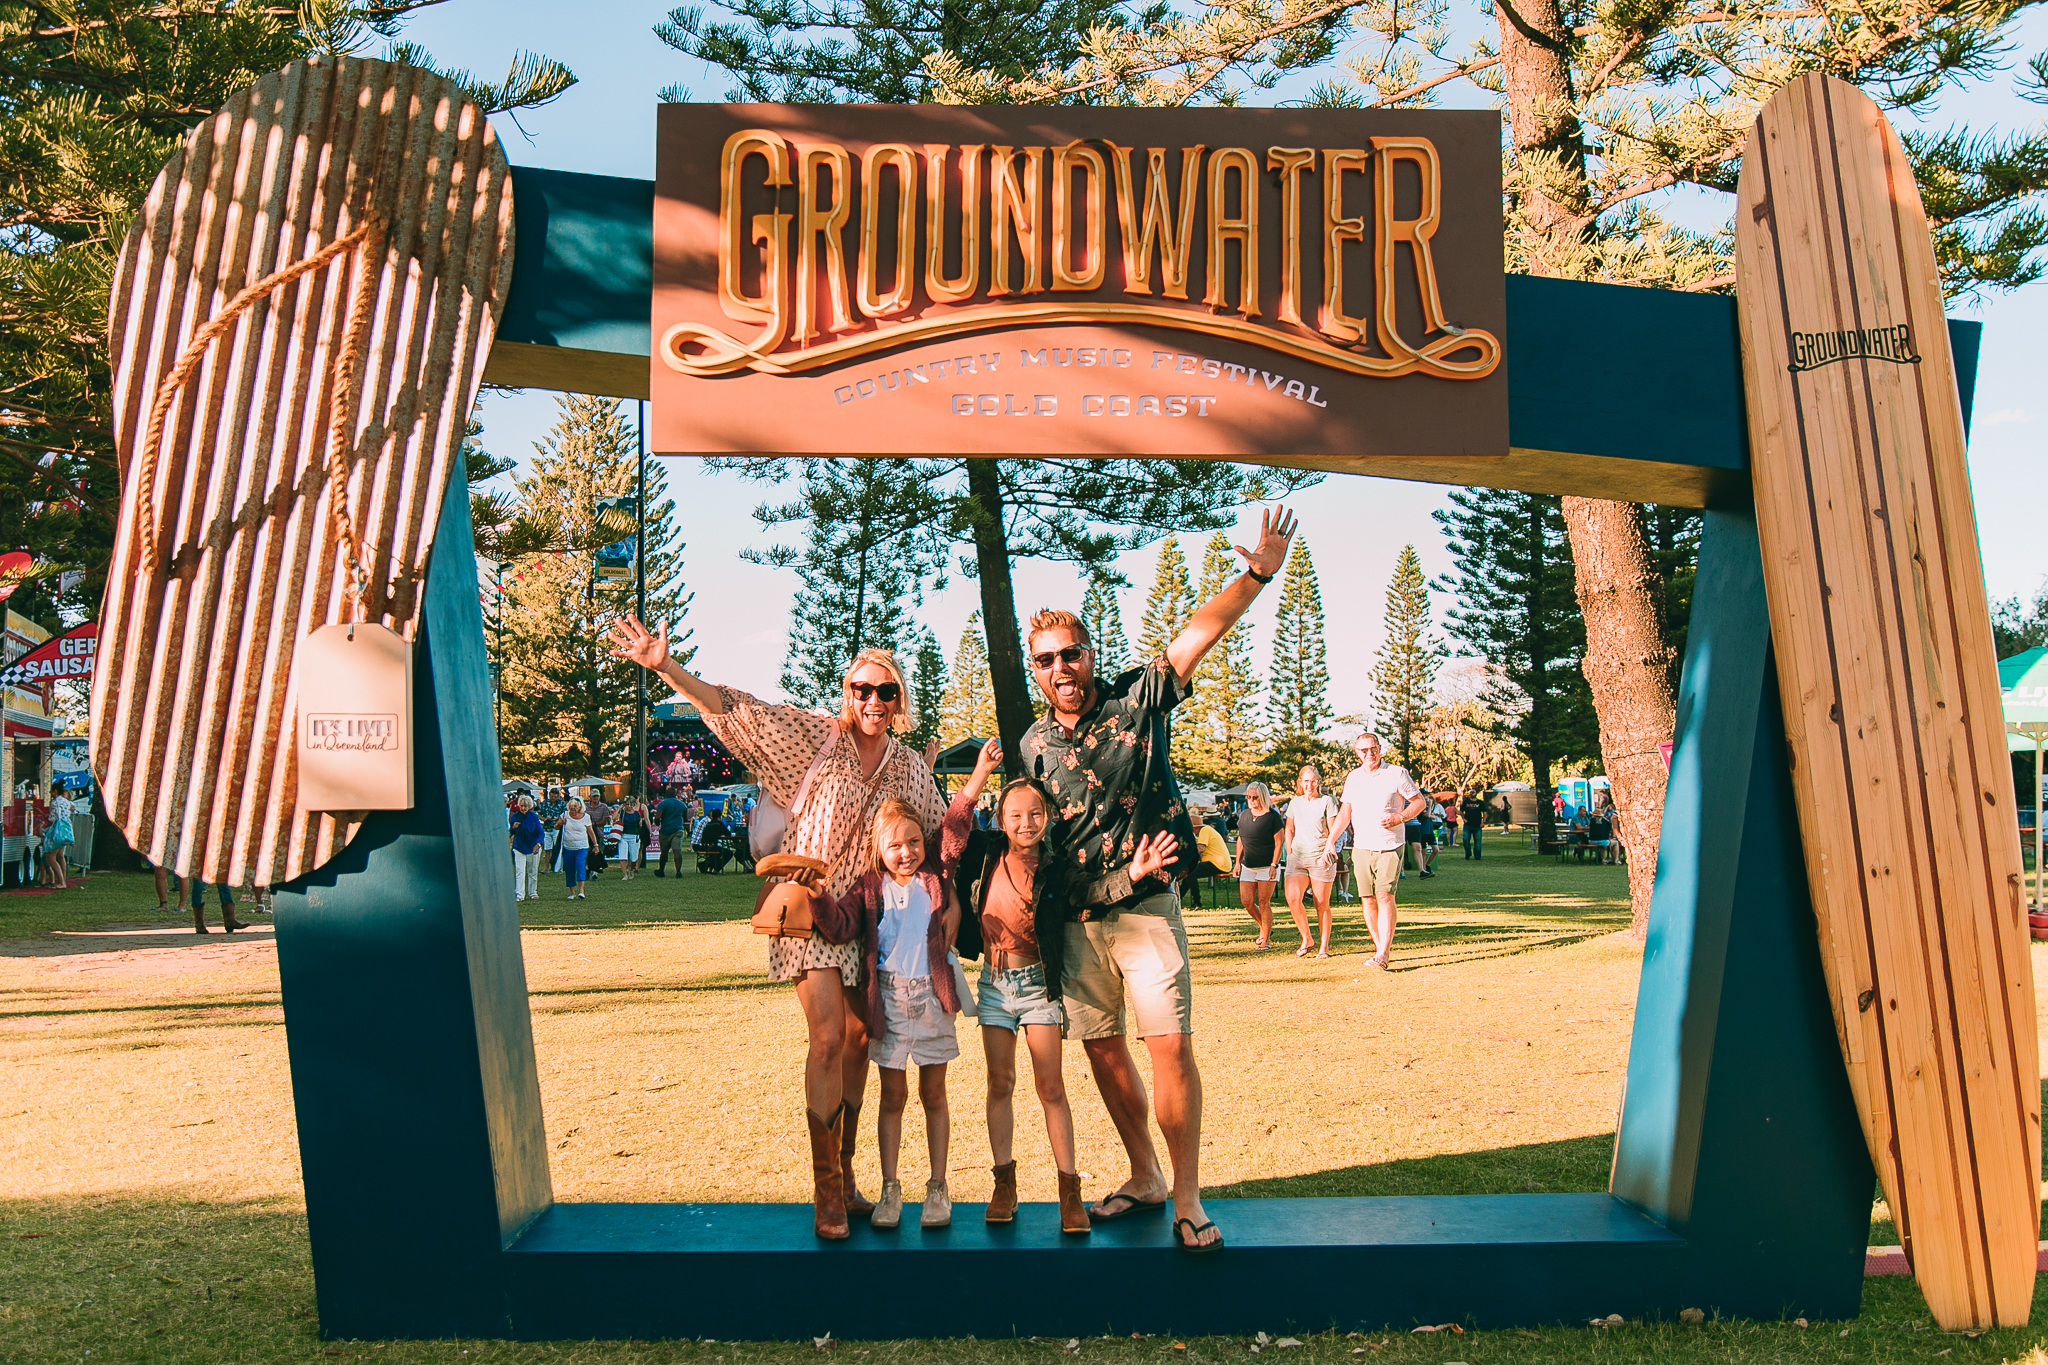 Groundwater Country Music Festival adds more artists to an already stellar lineup